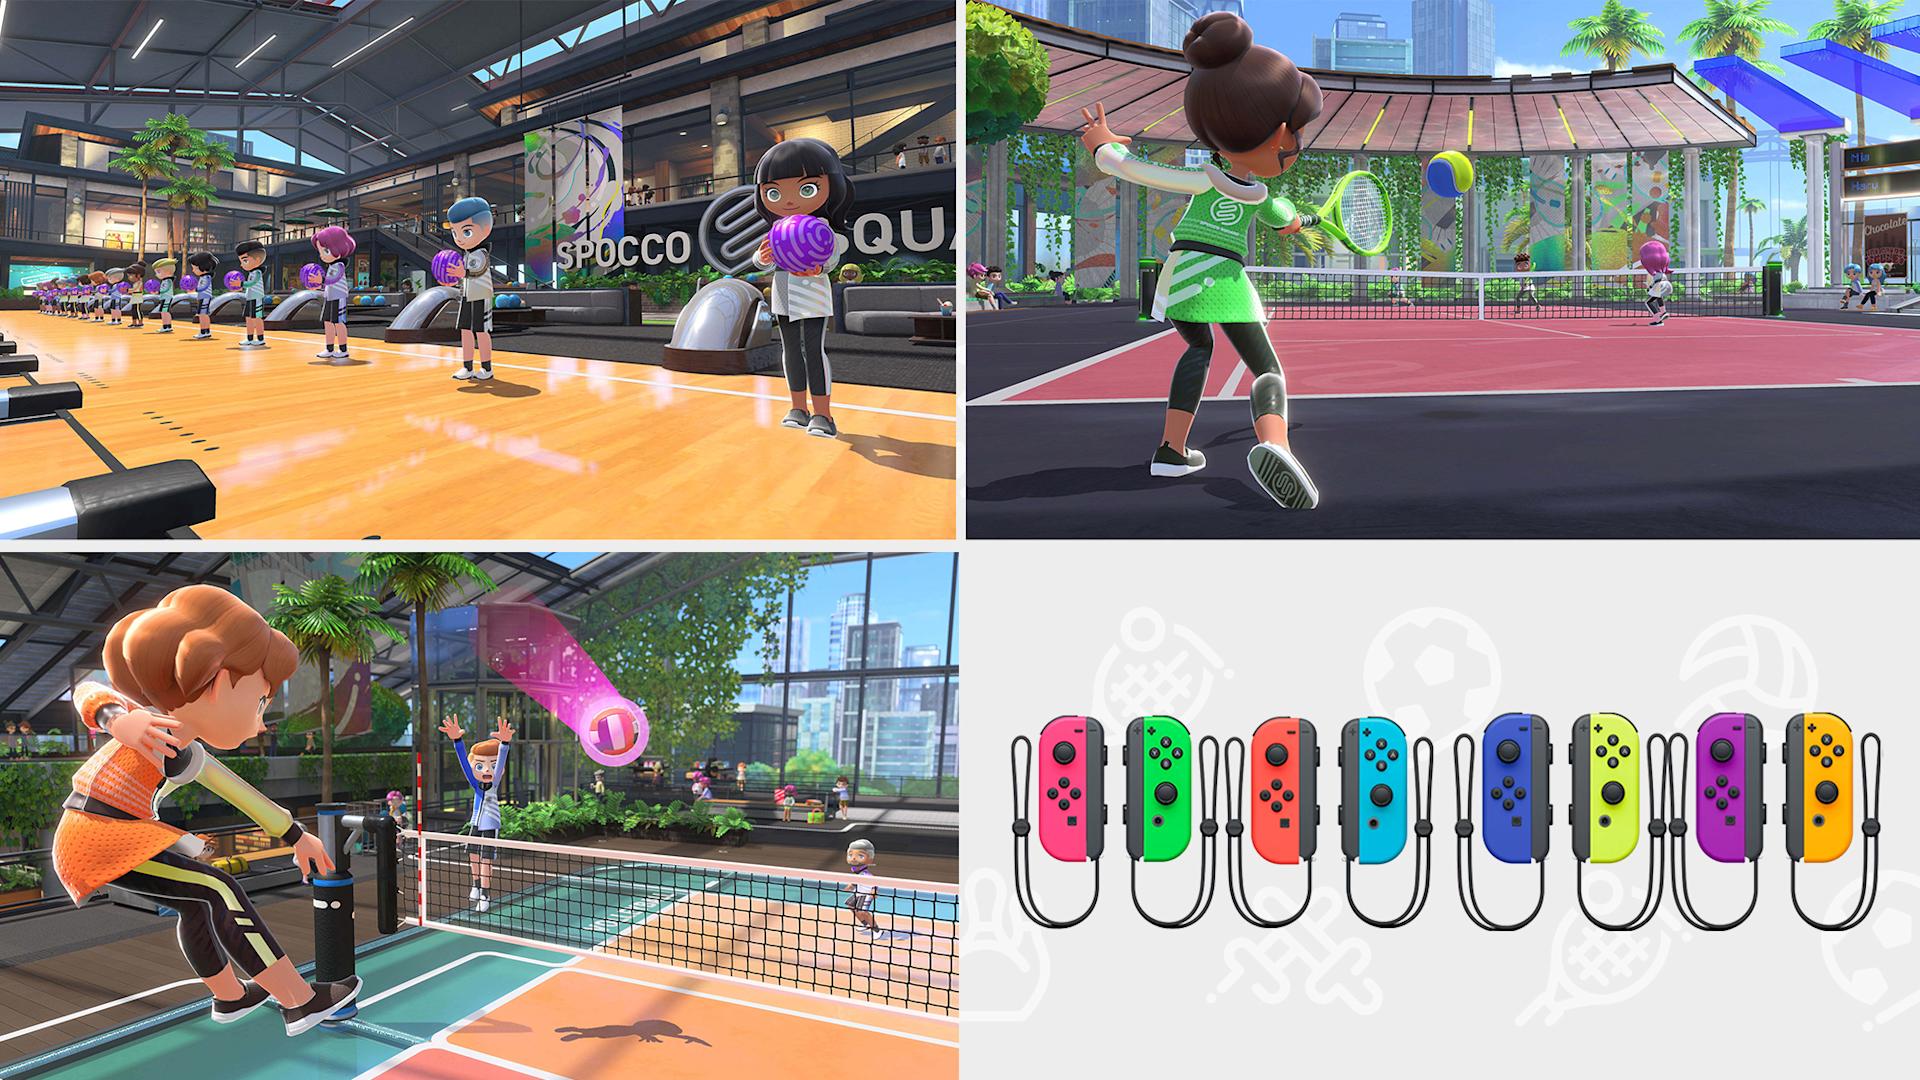 Need more Joy-Con to play local multiplayer with friends and family?